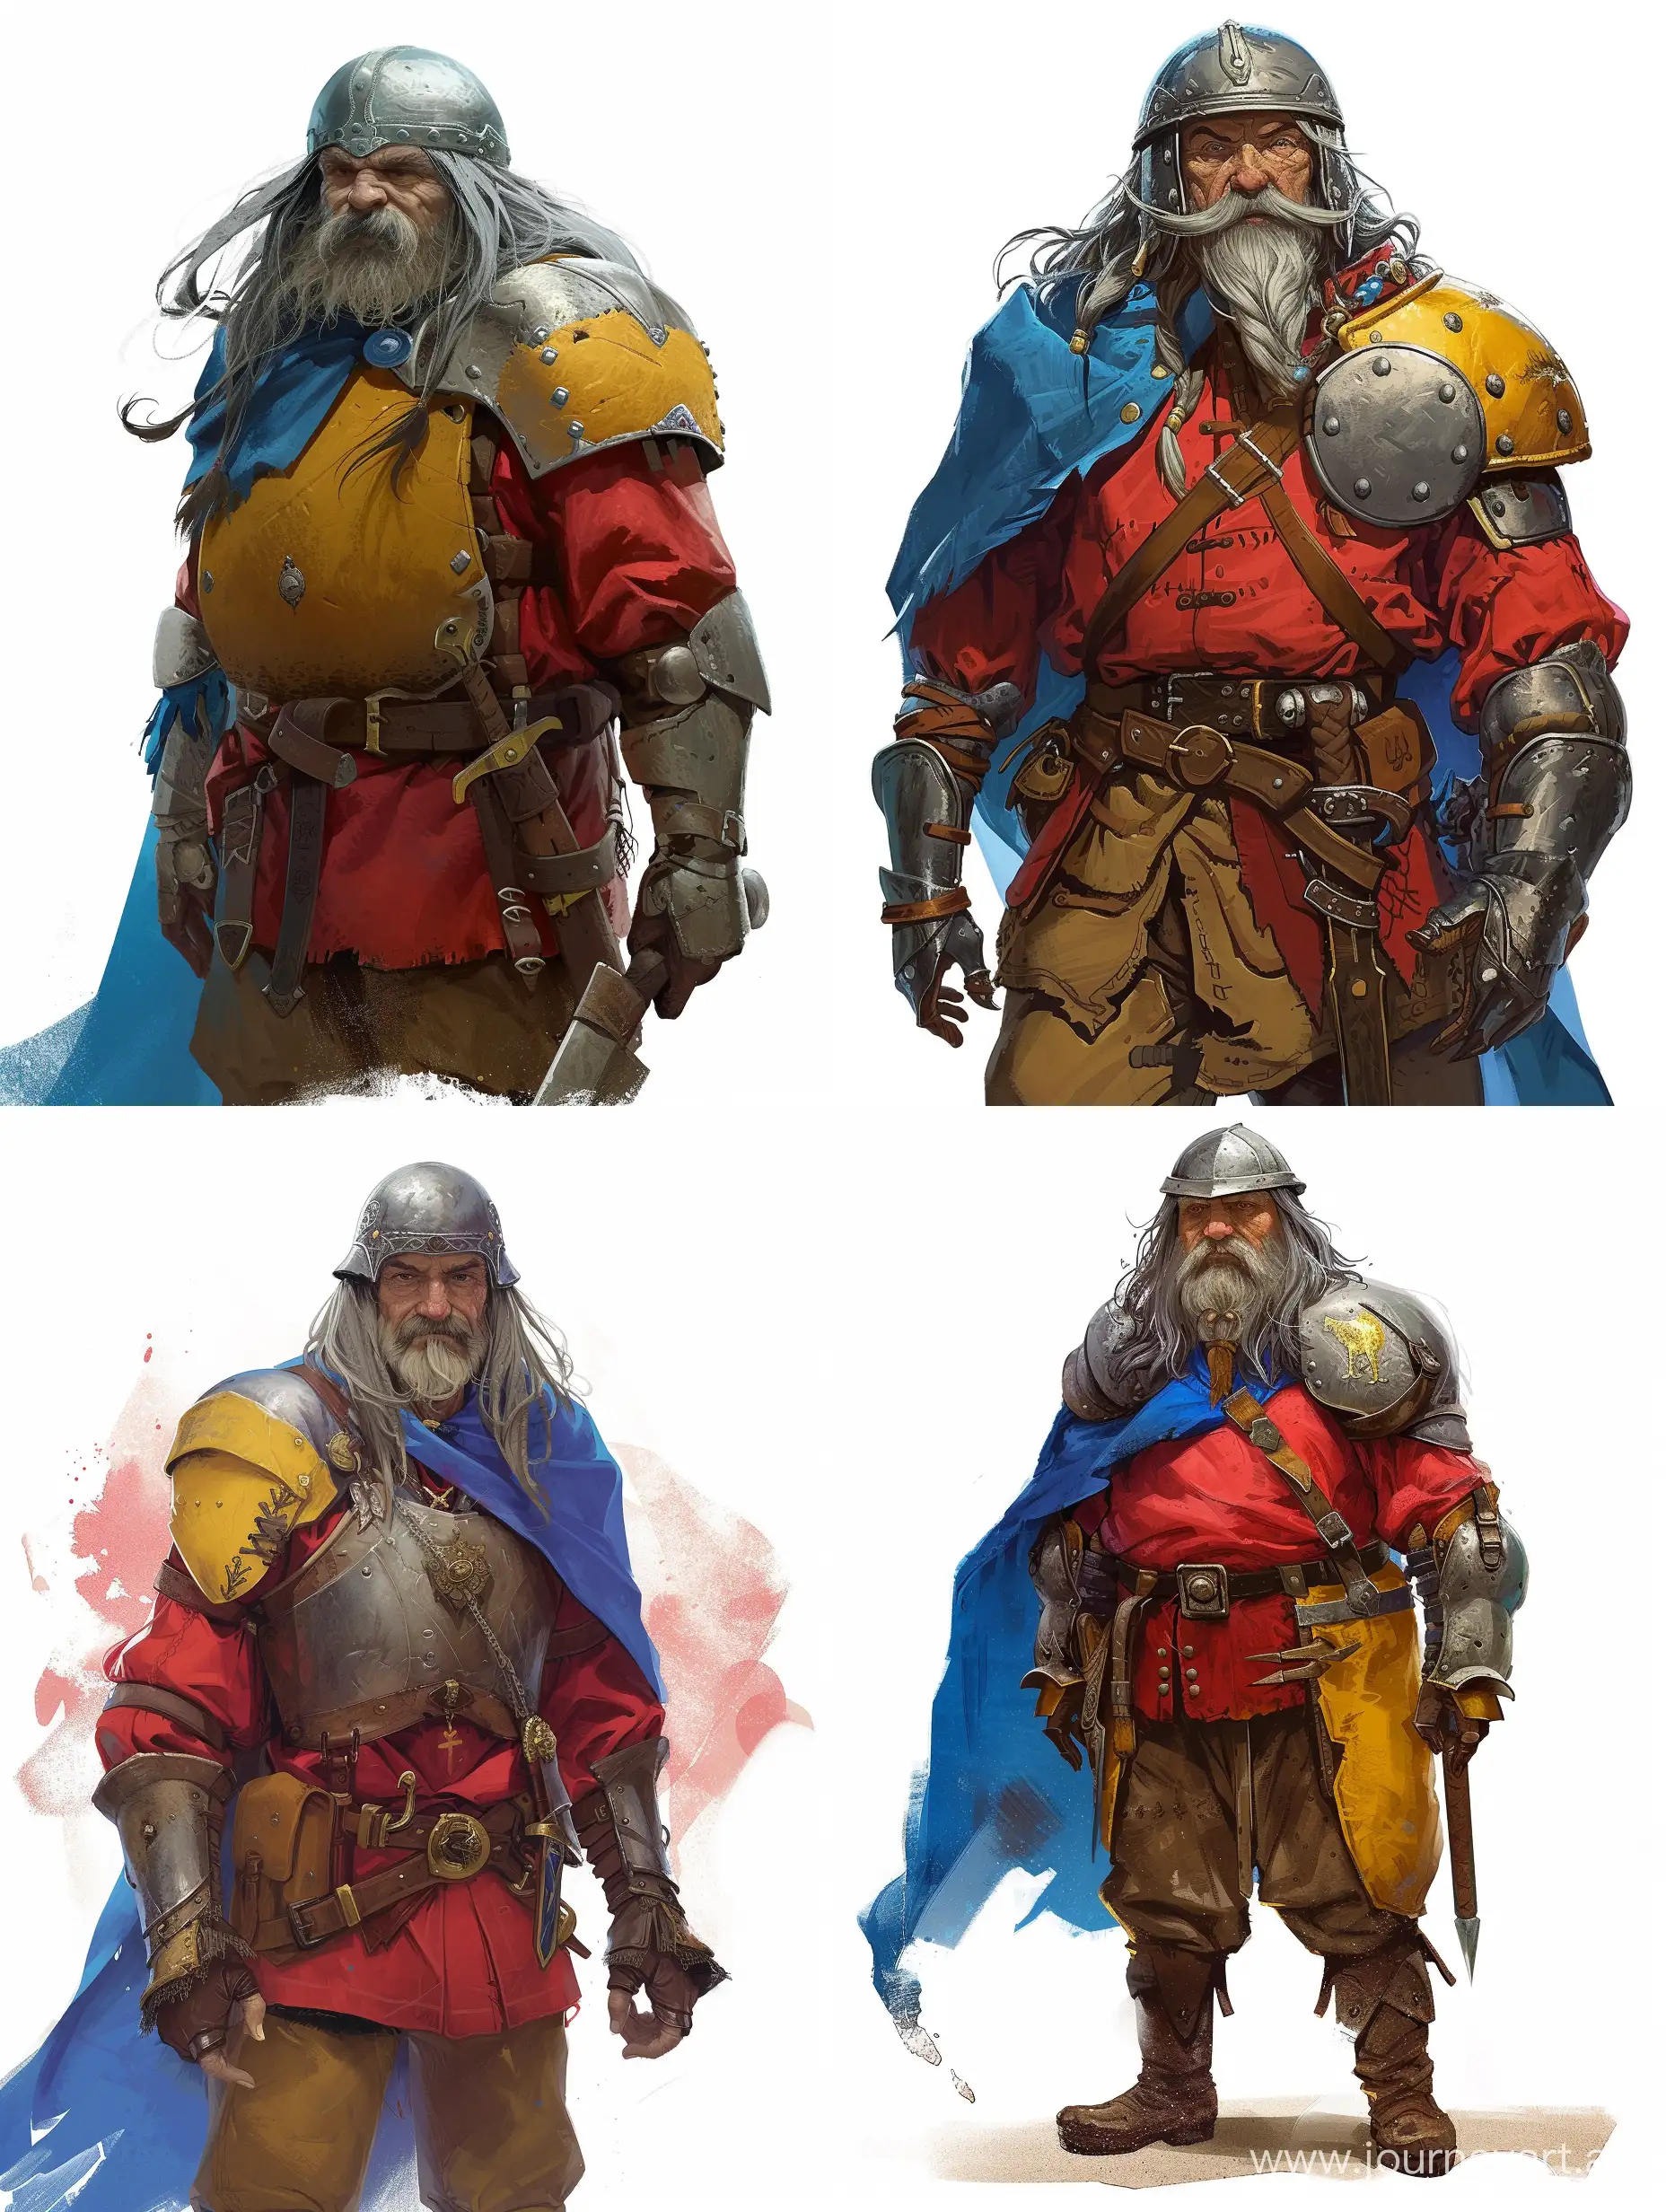 a short old man with long gray hair, mustache and beard, he wears a red shirt and brown trousers covered with metal armor, as well as a helmet with a visor. A blue cloak is attached to the shoulder armor, which has a yellow color on the back side.